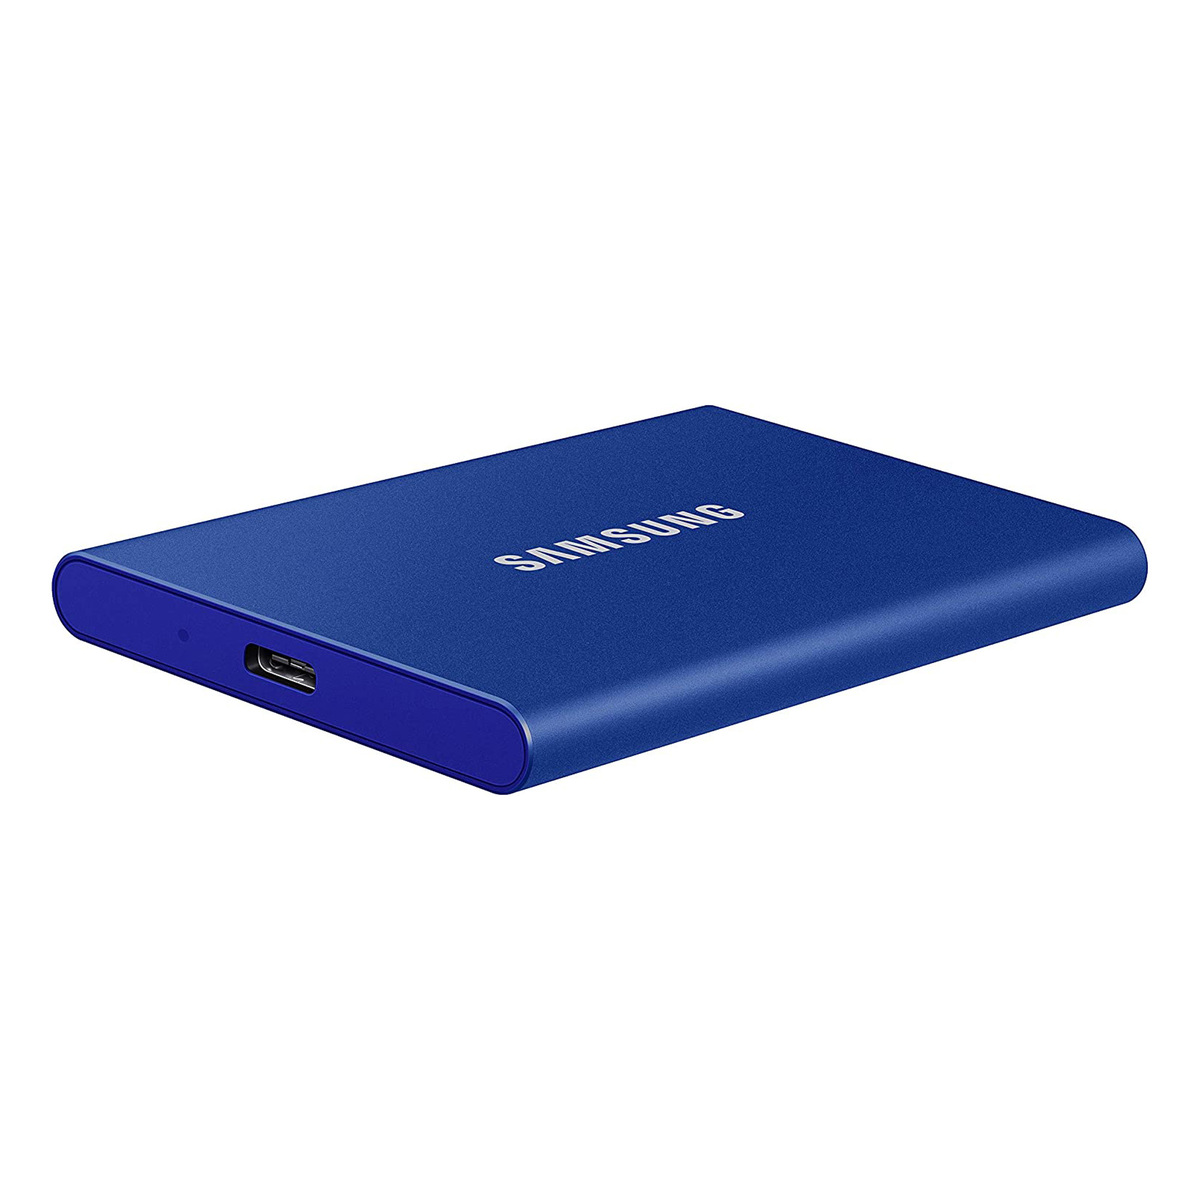 Samsung Portable External Solid State Drive T7 PC500H 500GB Blue